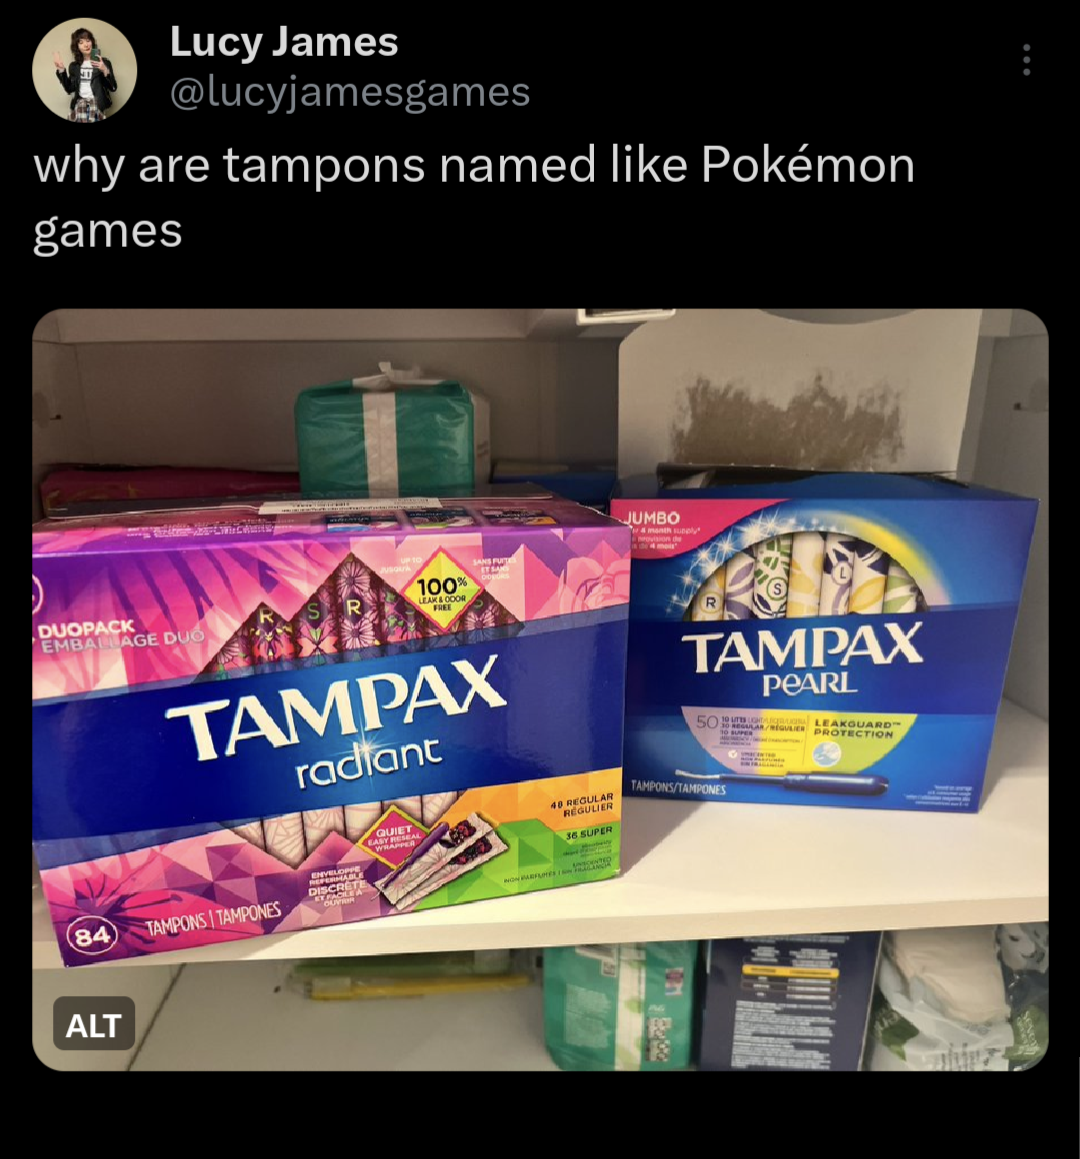 dank memes - display advertising - Lucy James why are tampons named Pokmon games Duopack Emia Age Dus Alt 84 Tampons Tampones 100 Alte Tampax radiant www Jumbo Sel Tampax Pearl Searogard